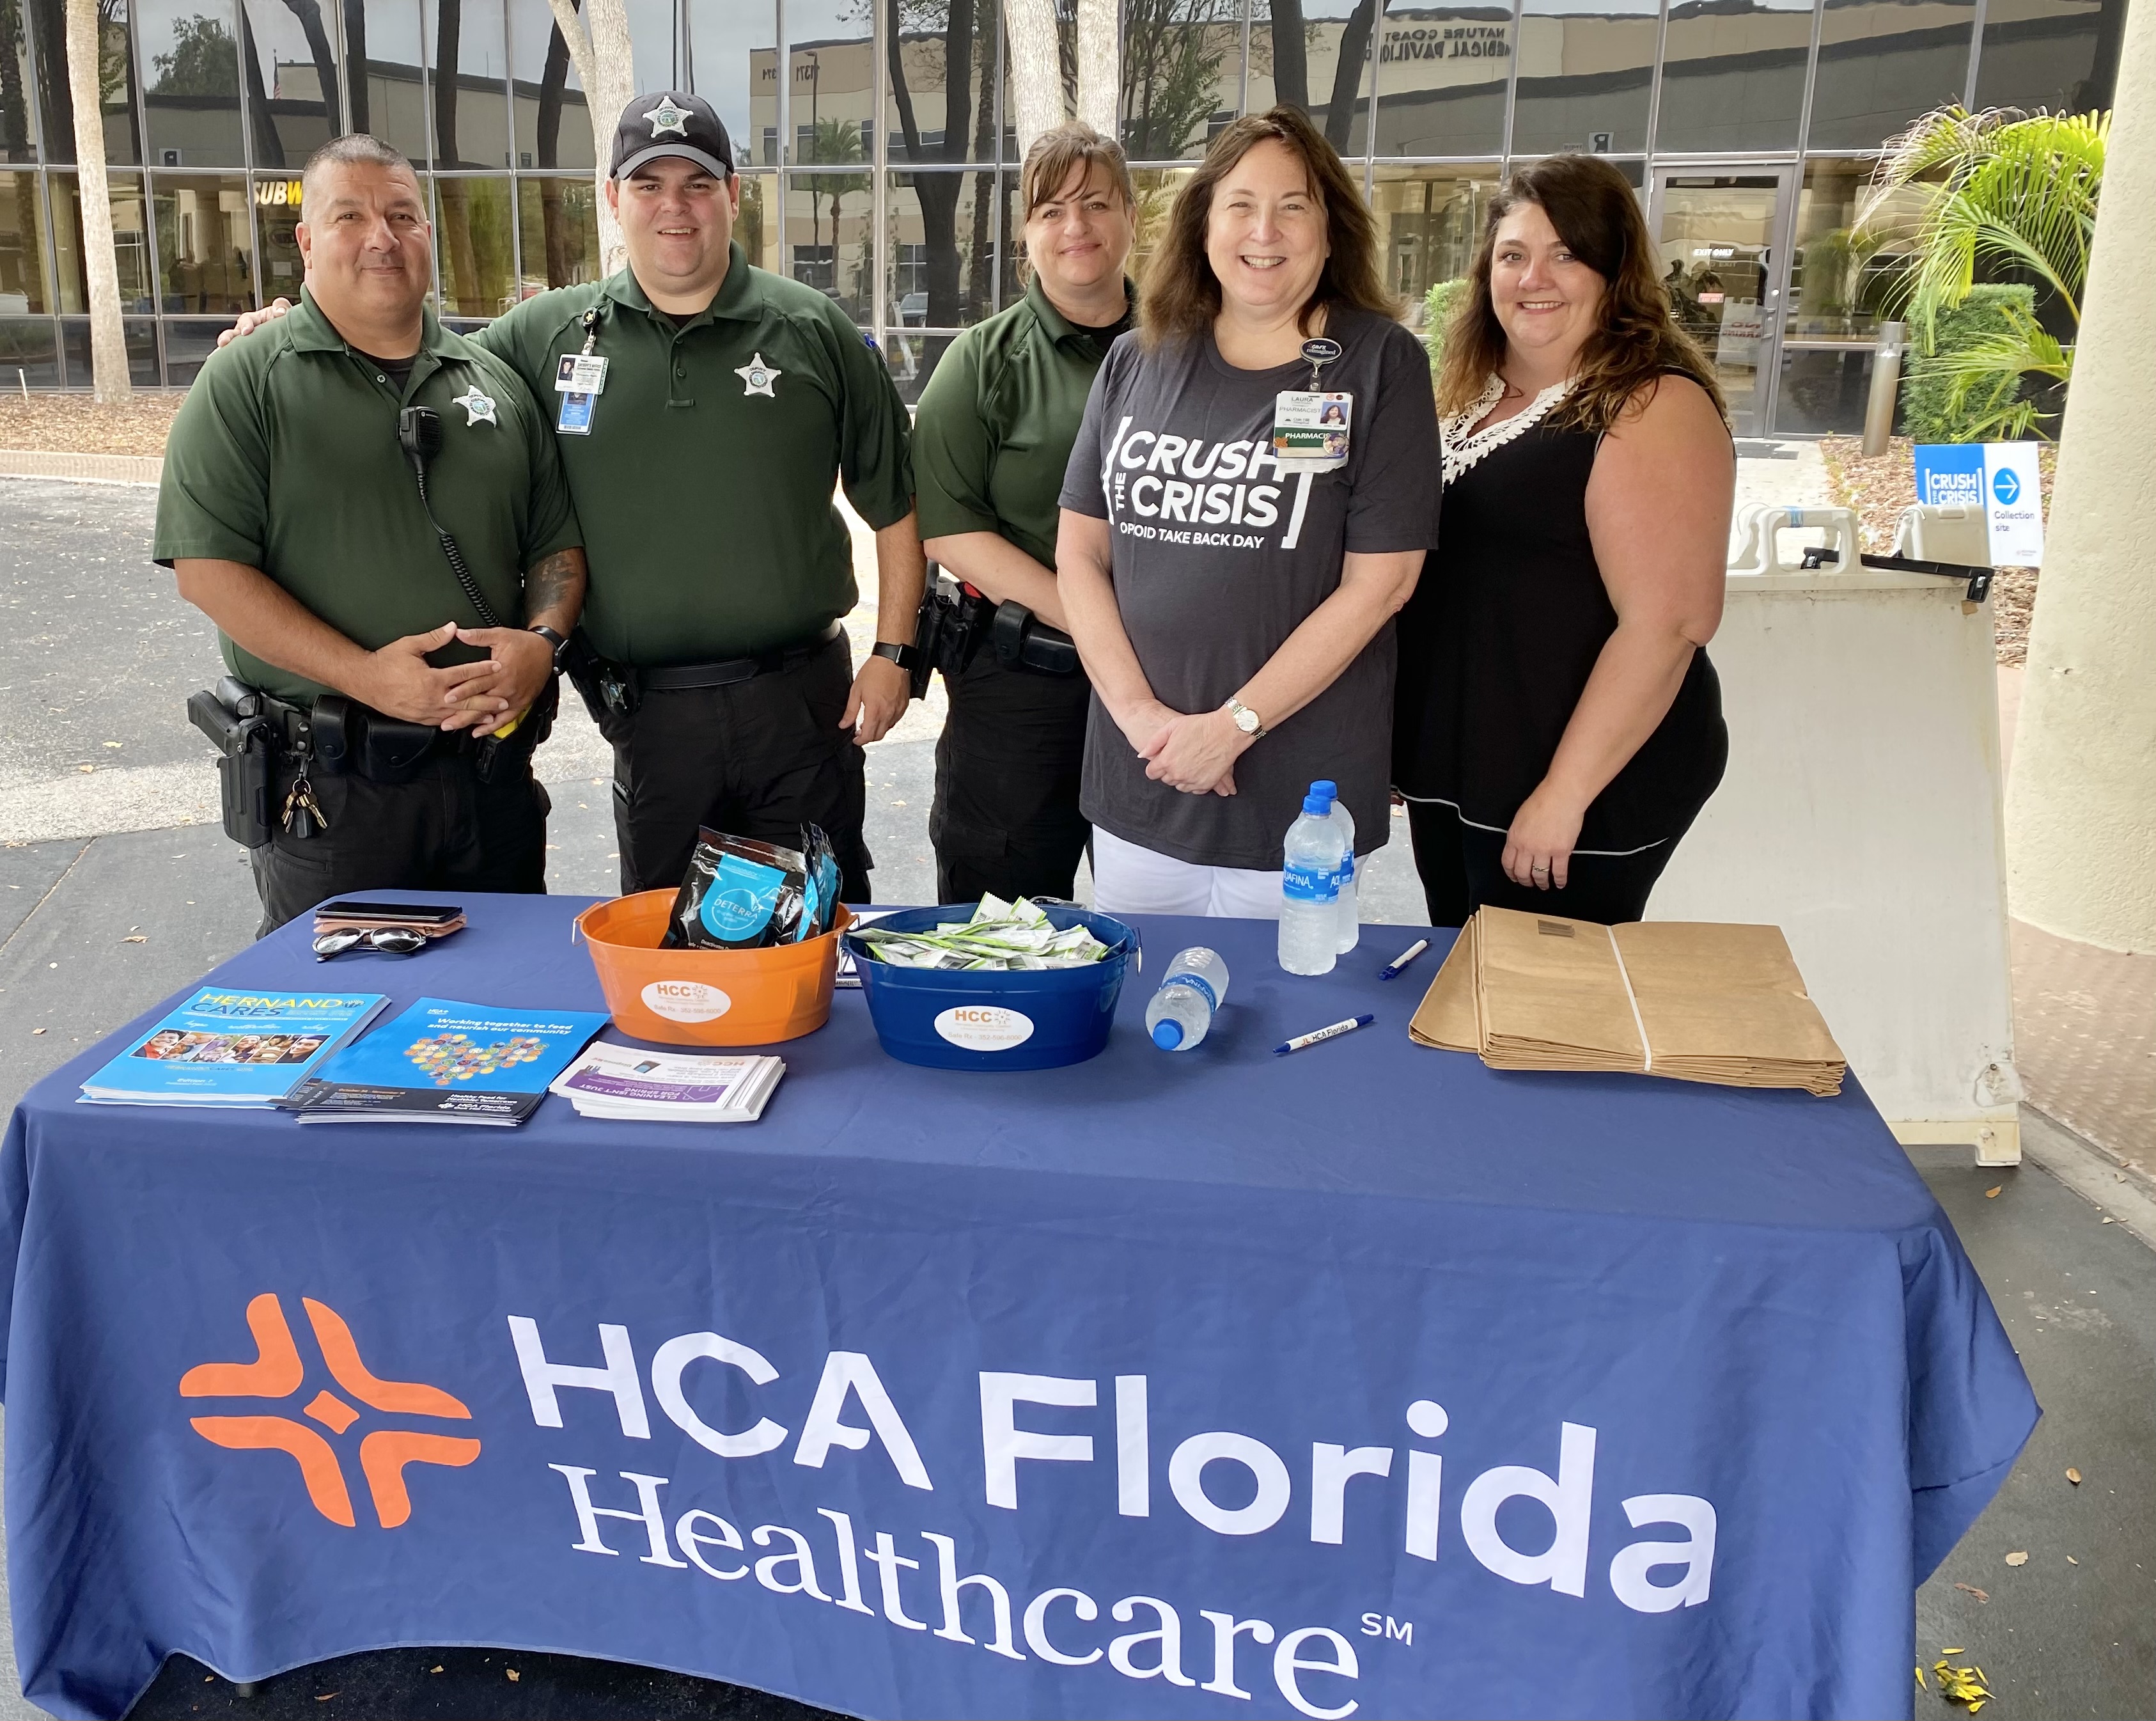 HCA Florida Oak Hill Hospital and the Hernando County Sheriff's Office (HCSO) collected 56.8 pounds of medications during the second annual Crush the Crisis National Opioid Take Back Day event on Saturday, October 29, 2022.